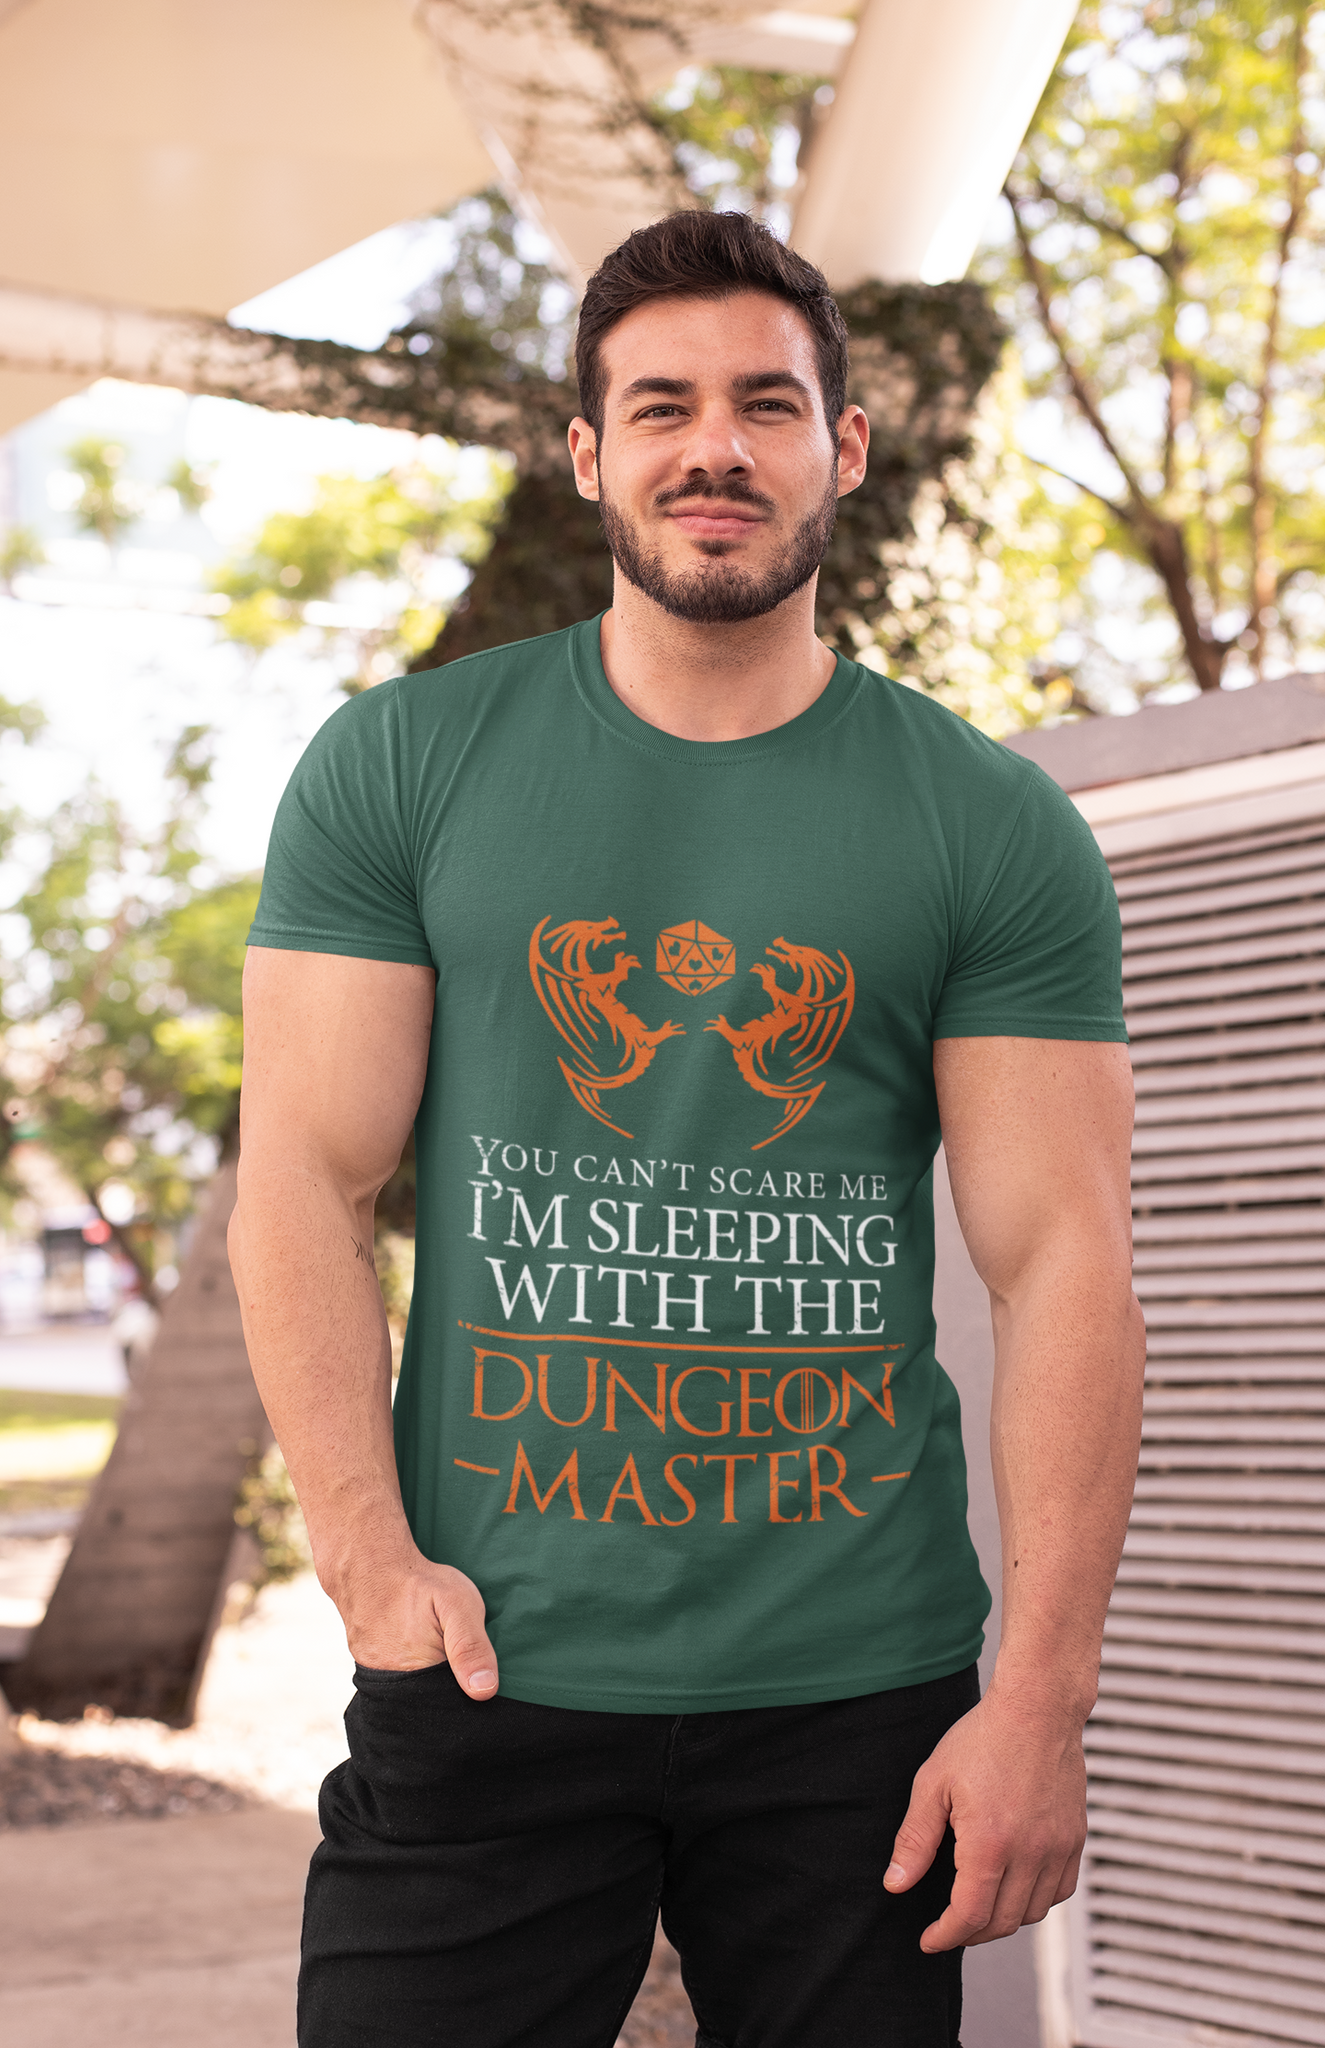 Dungeon And Dragon T Shirt, RPG Dice Games Tshirt, You Cant Scare Me Im Sleeping With The Dungeon Master DND T Shirt